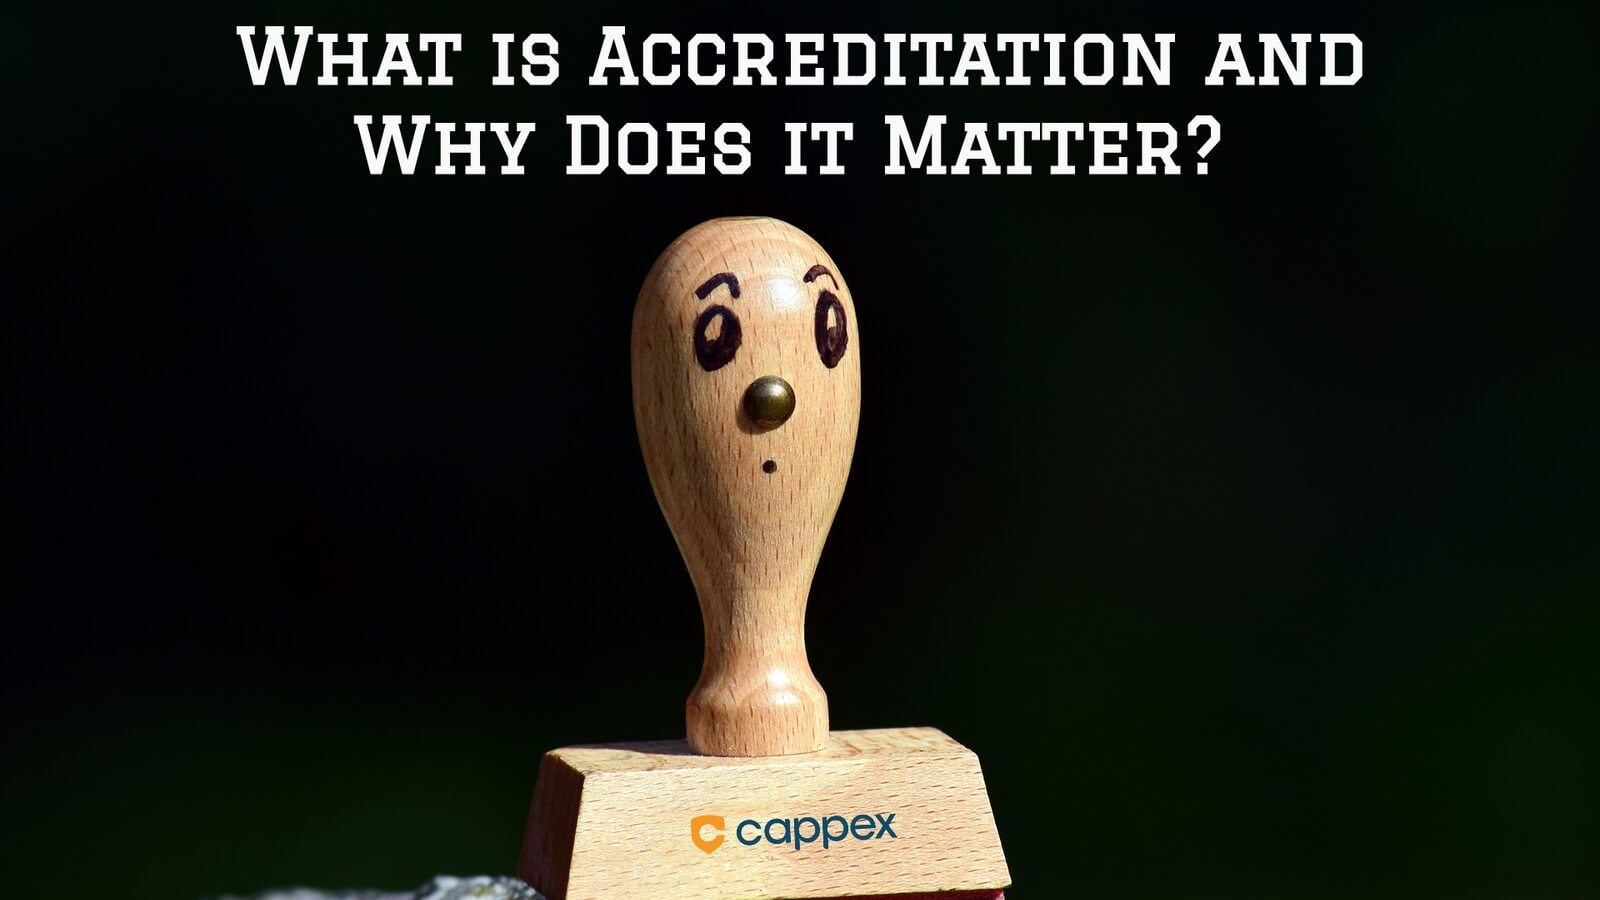 What Is Accreditation and Why Does It Matter?